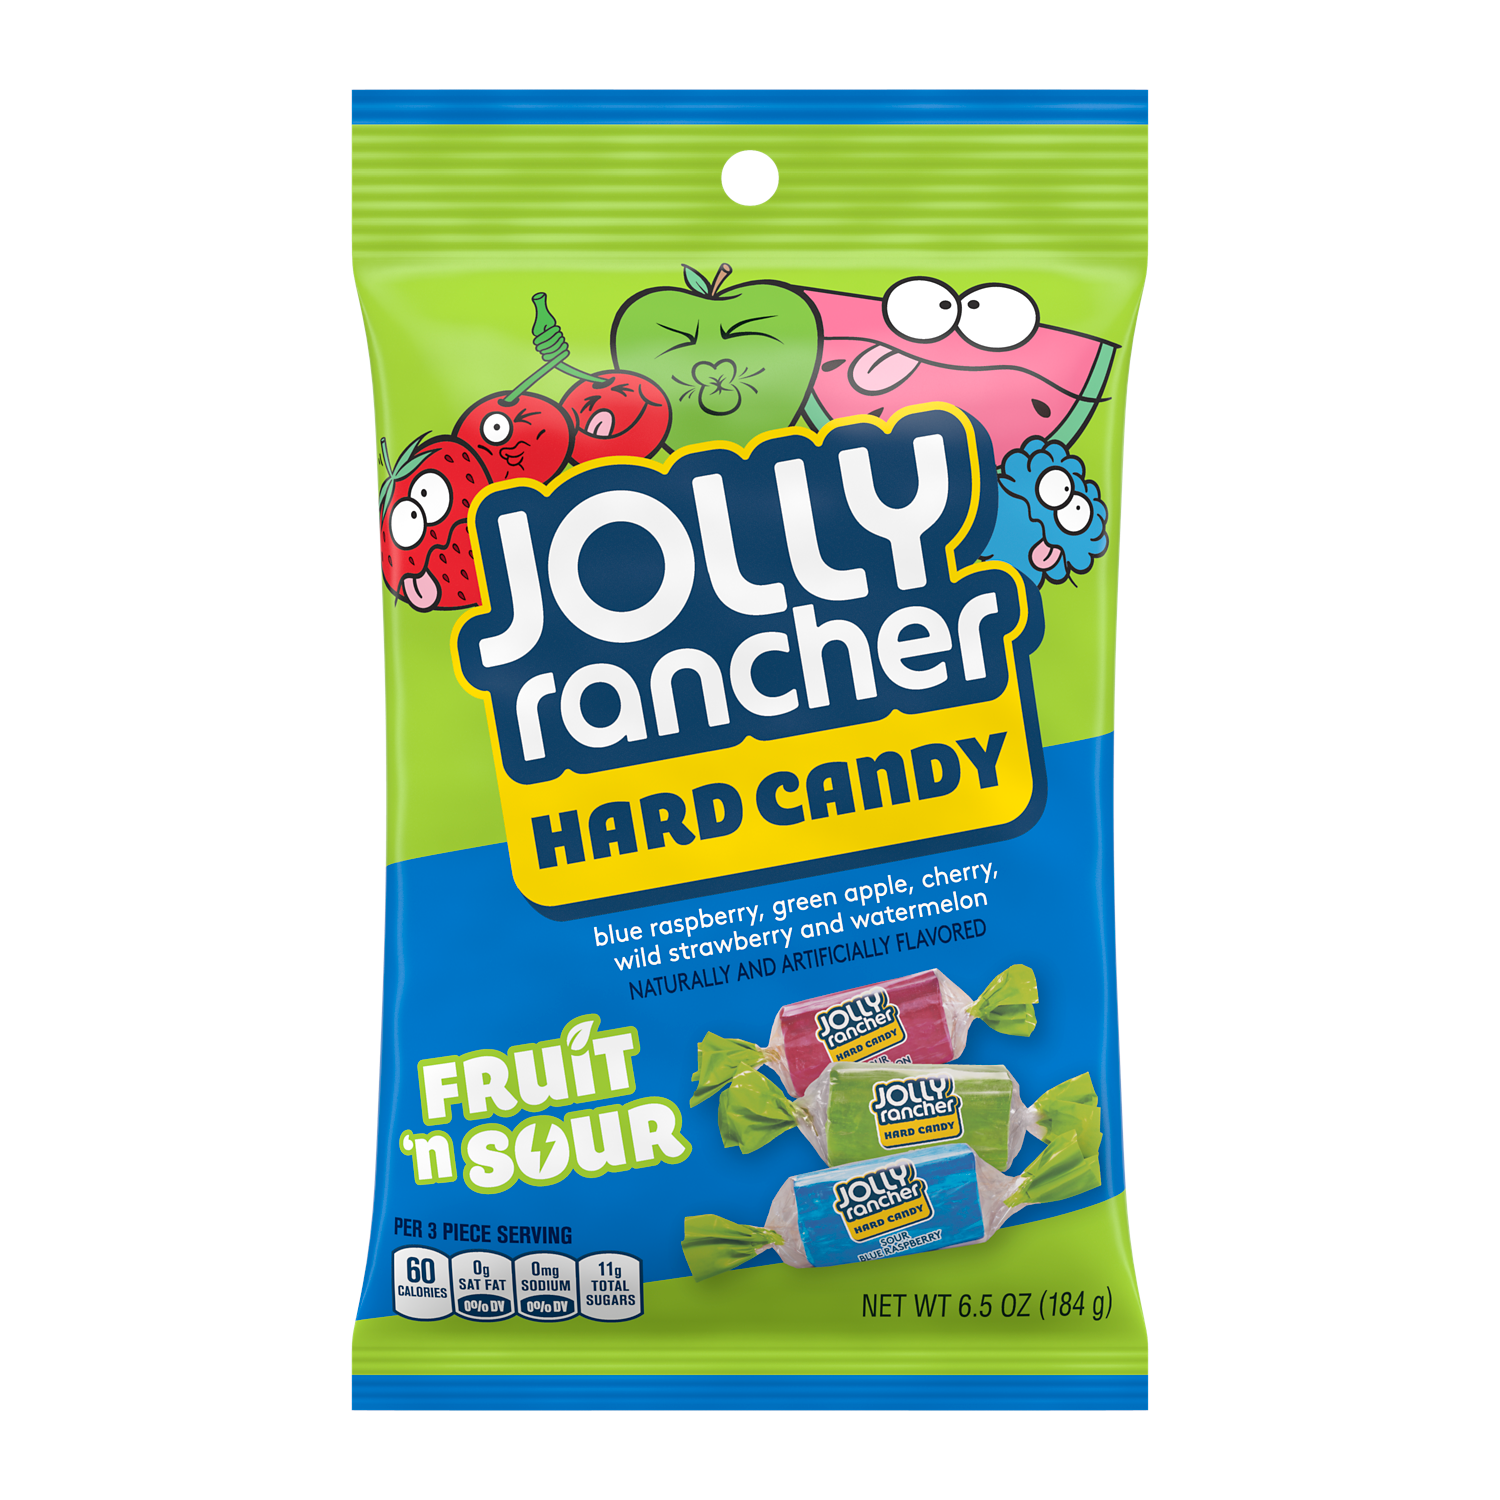 JOLLY RANCHER Fruit 'N Sour Hard Candy, 6.5 oz bag - Front of Package